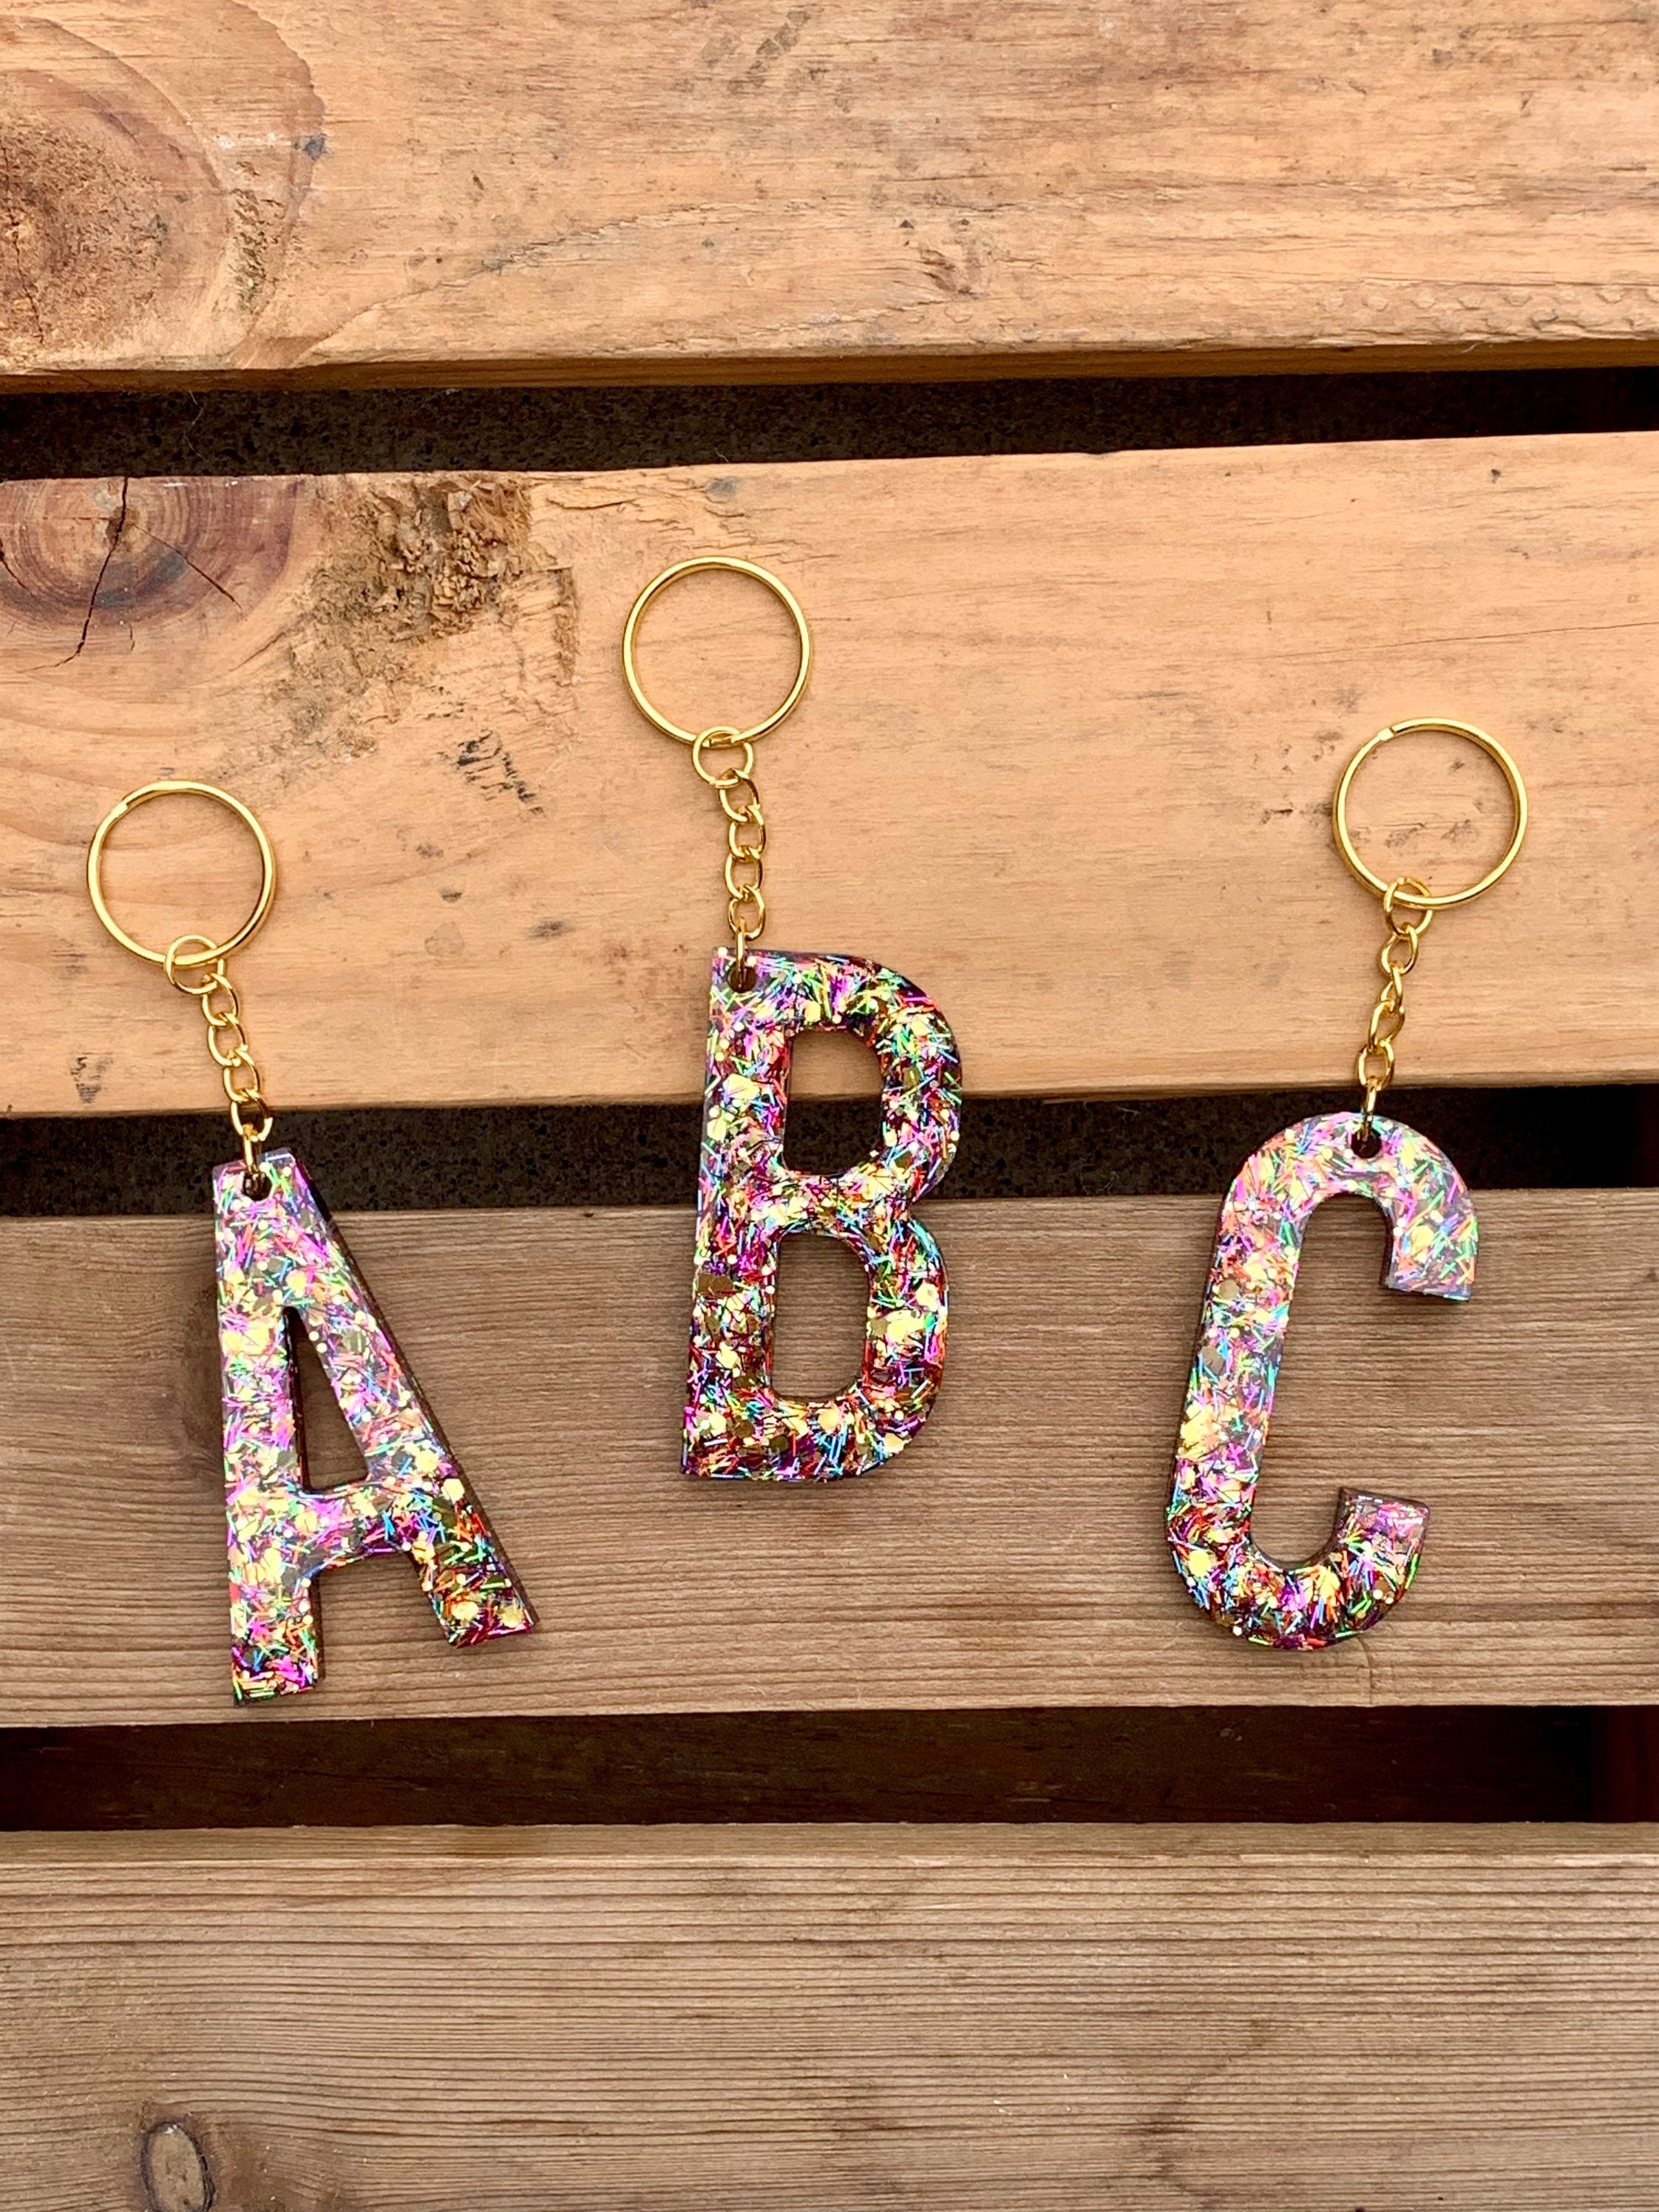 Acrylic Resin Keychain With Glitter Resin Pendant And A Z Letter Design  Stylish Car Keyring Holder For Womens Bags And Gifts From Yambags, $1.3